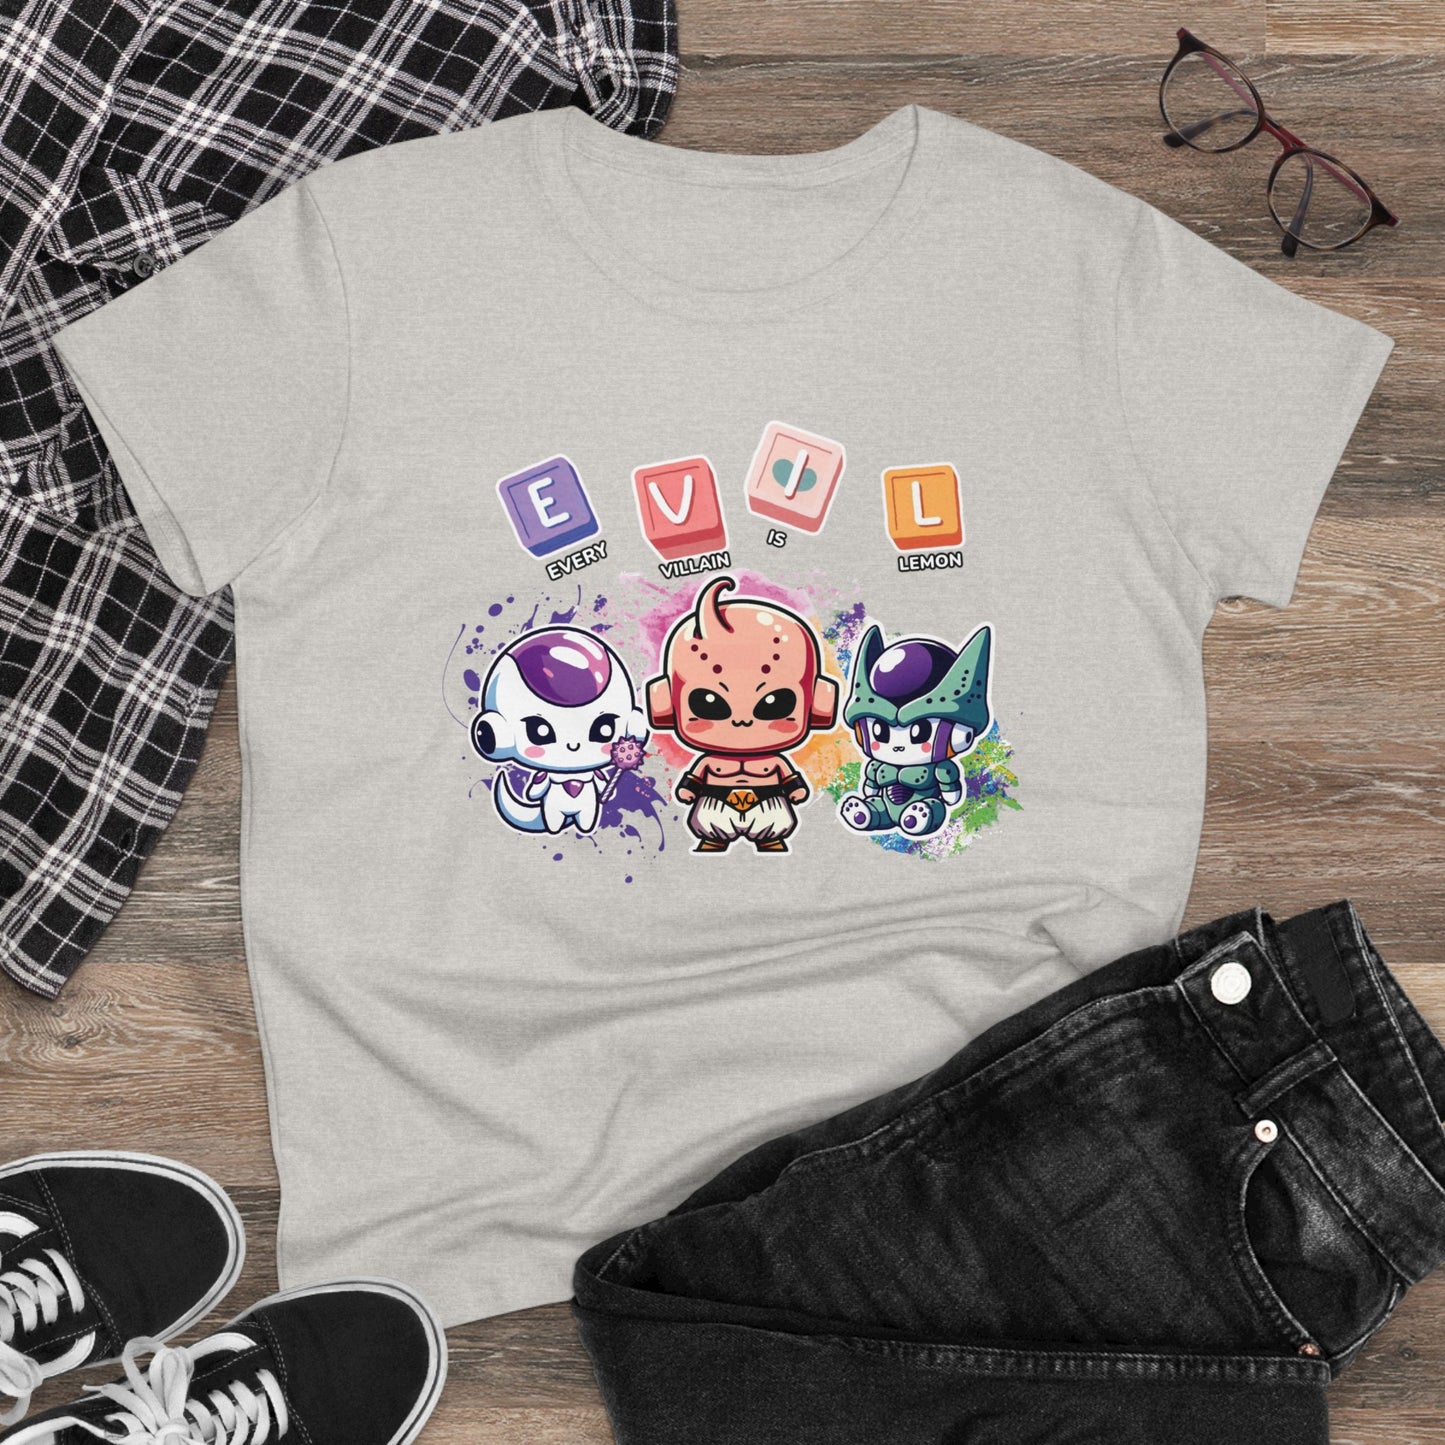 Tiny Tyrants of the Galaxy: Every Villain Is Lemon  – Death by Cuteness!, Women's Cotton Graphic Tee